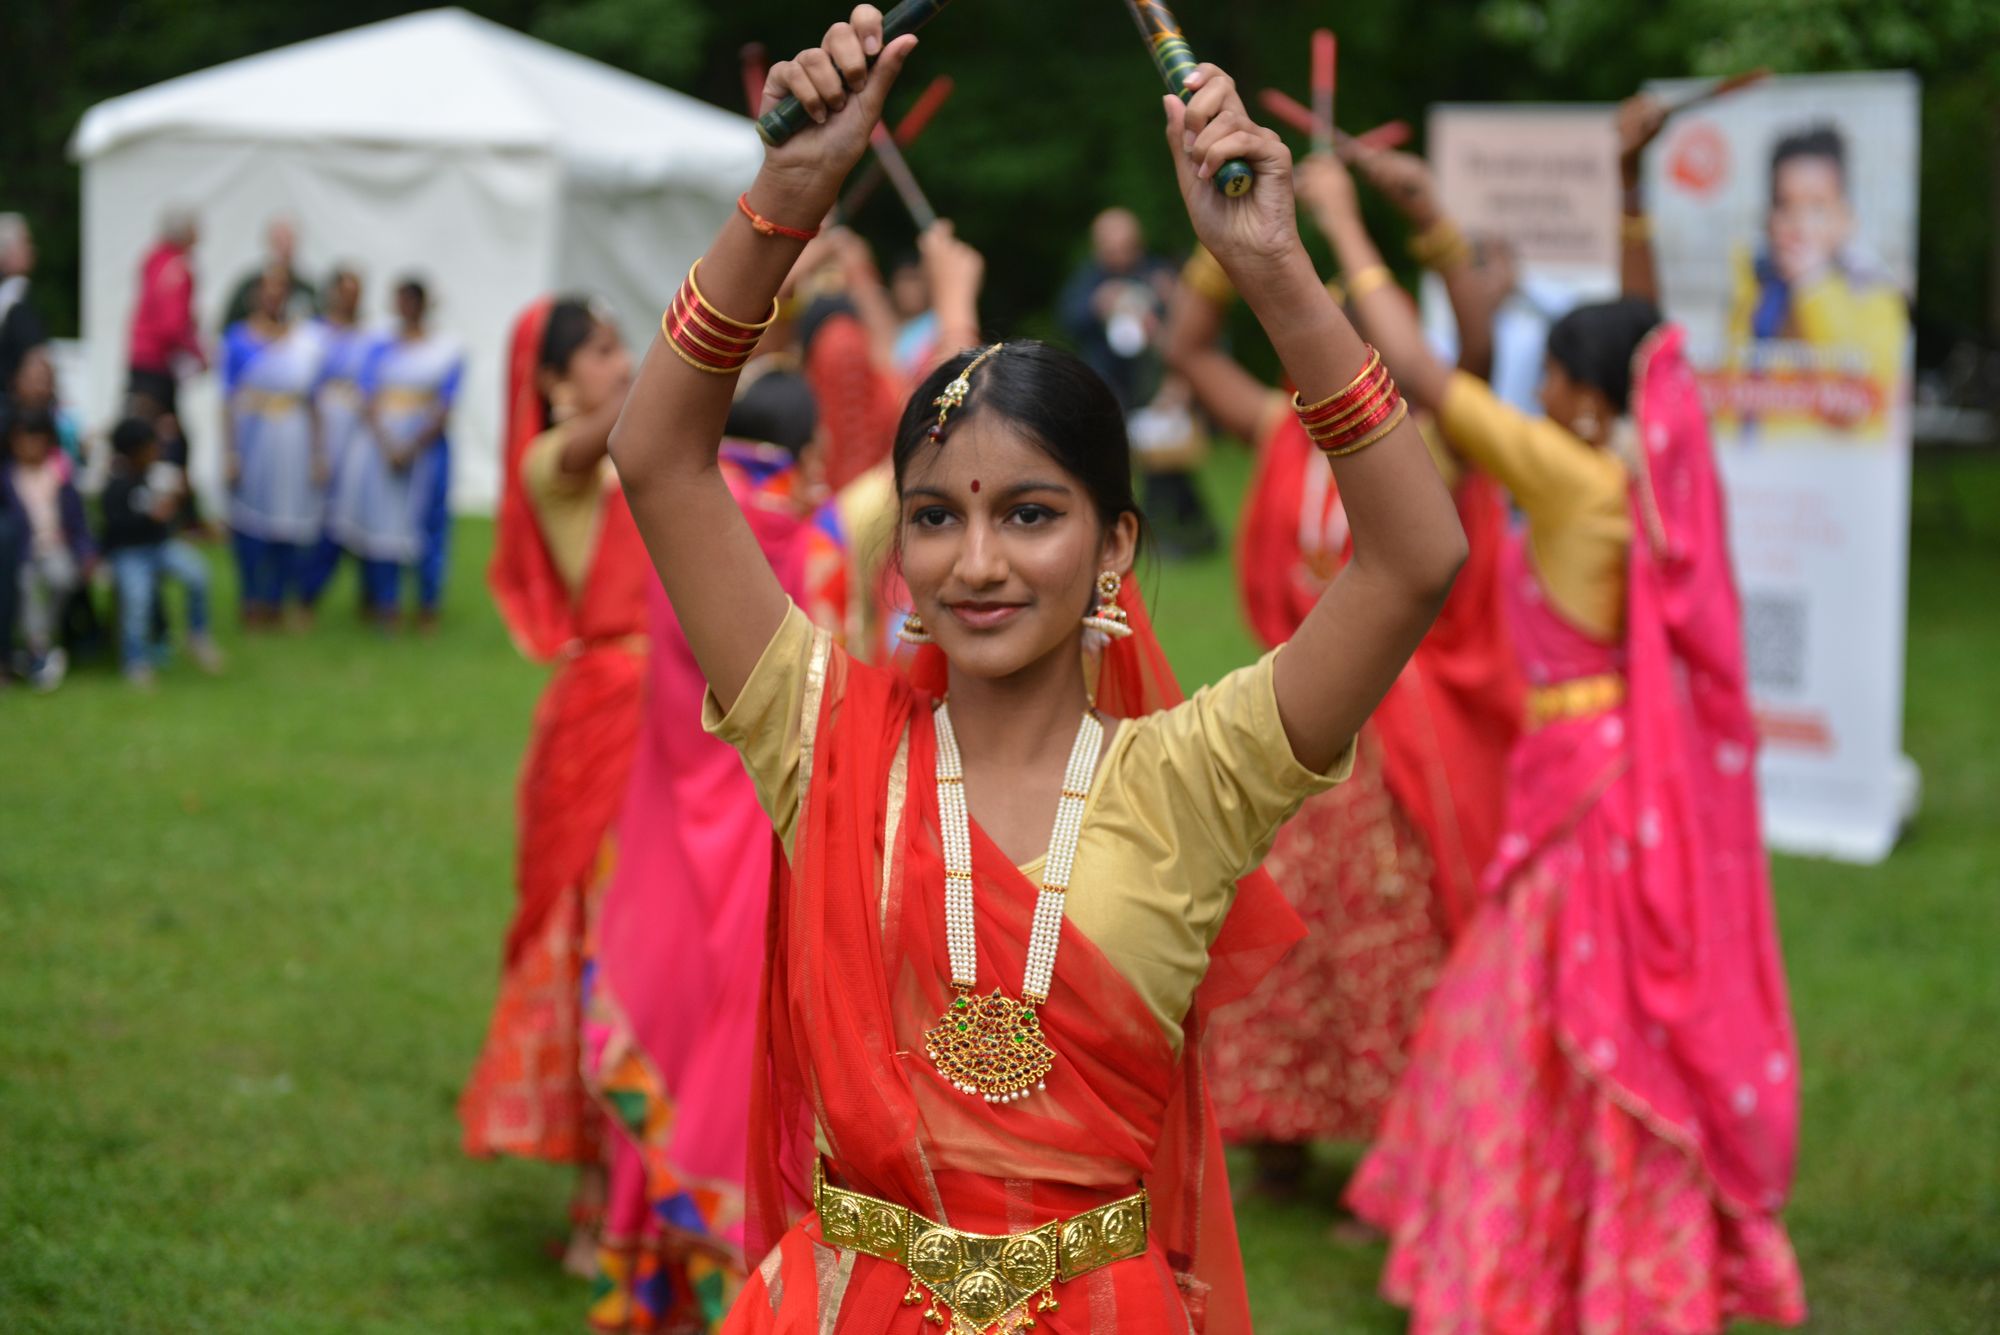 Multi-cultural Fest makes first appearance in Elmira